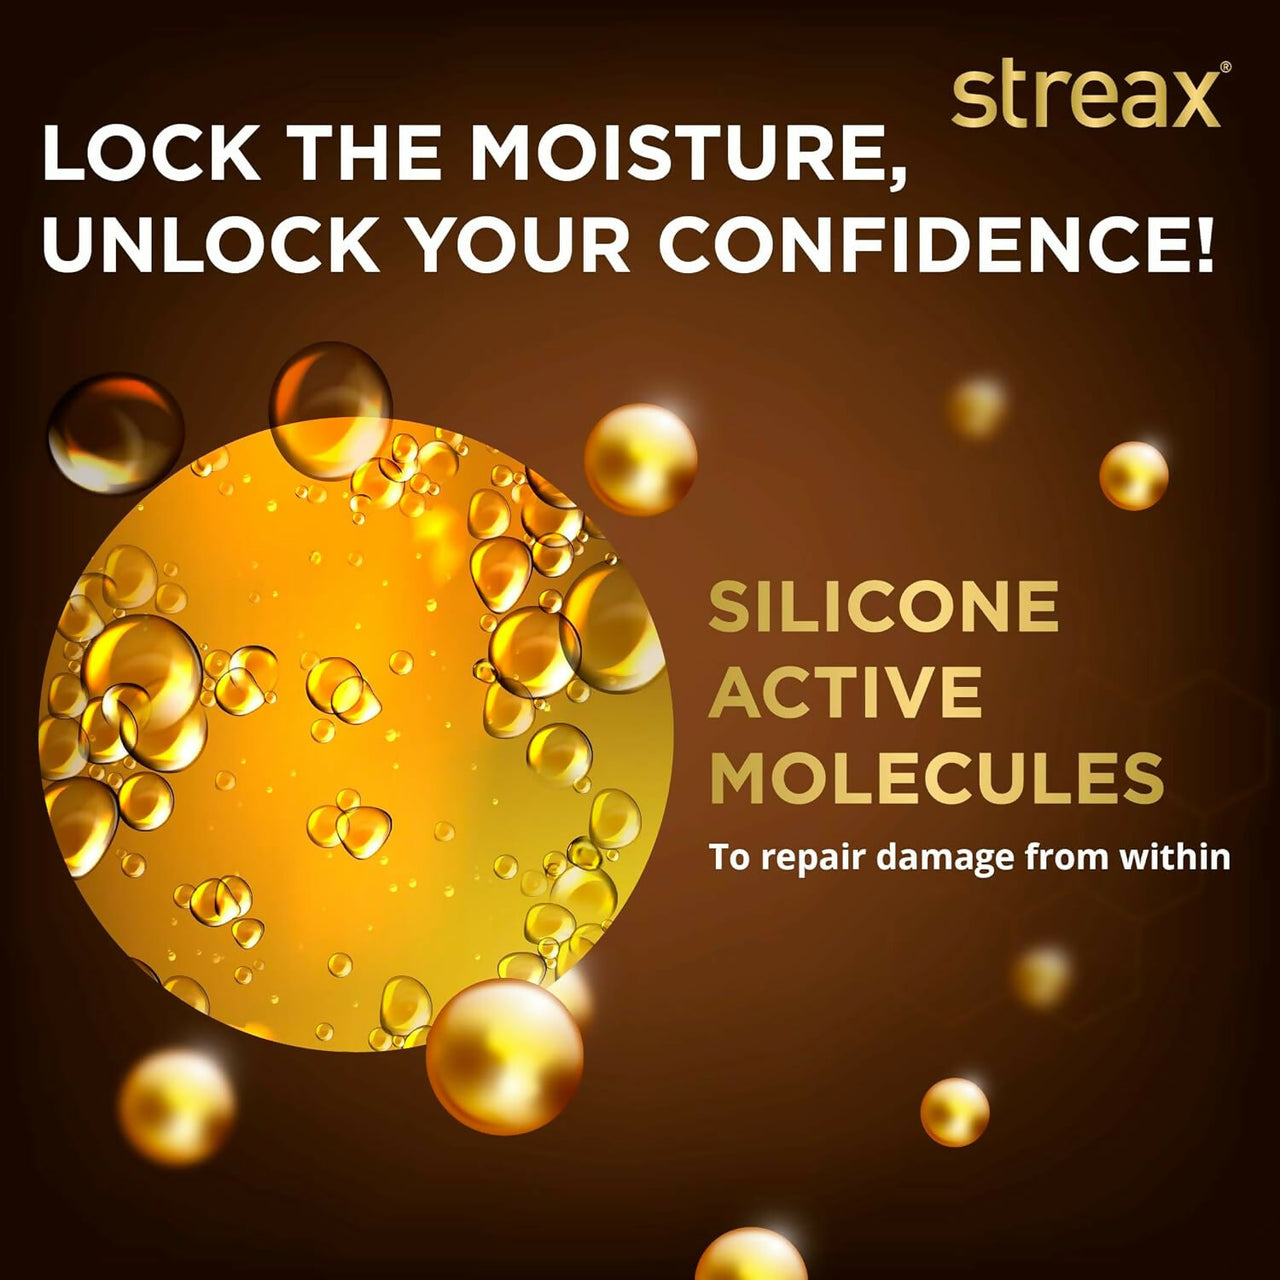 Streax Glossy Serum Shine Hair Conditioner For Dull & Dry Hair, With Silicon Actives for Shiny Hair & Frizz Control - Distacart